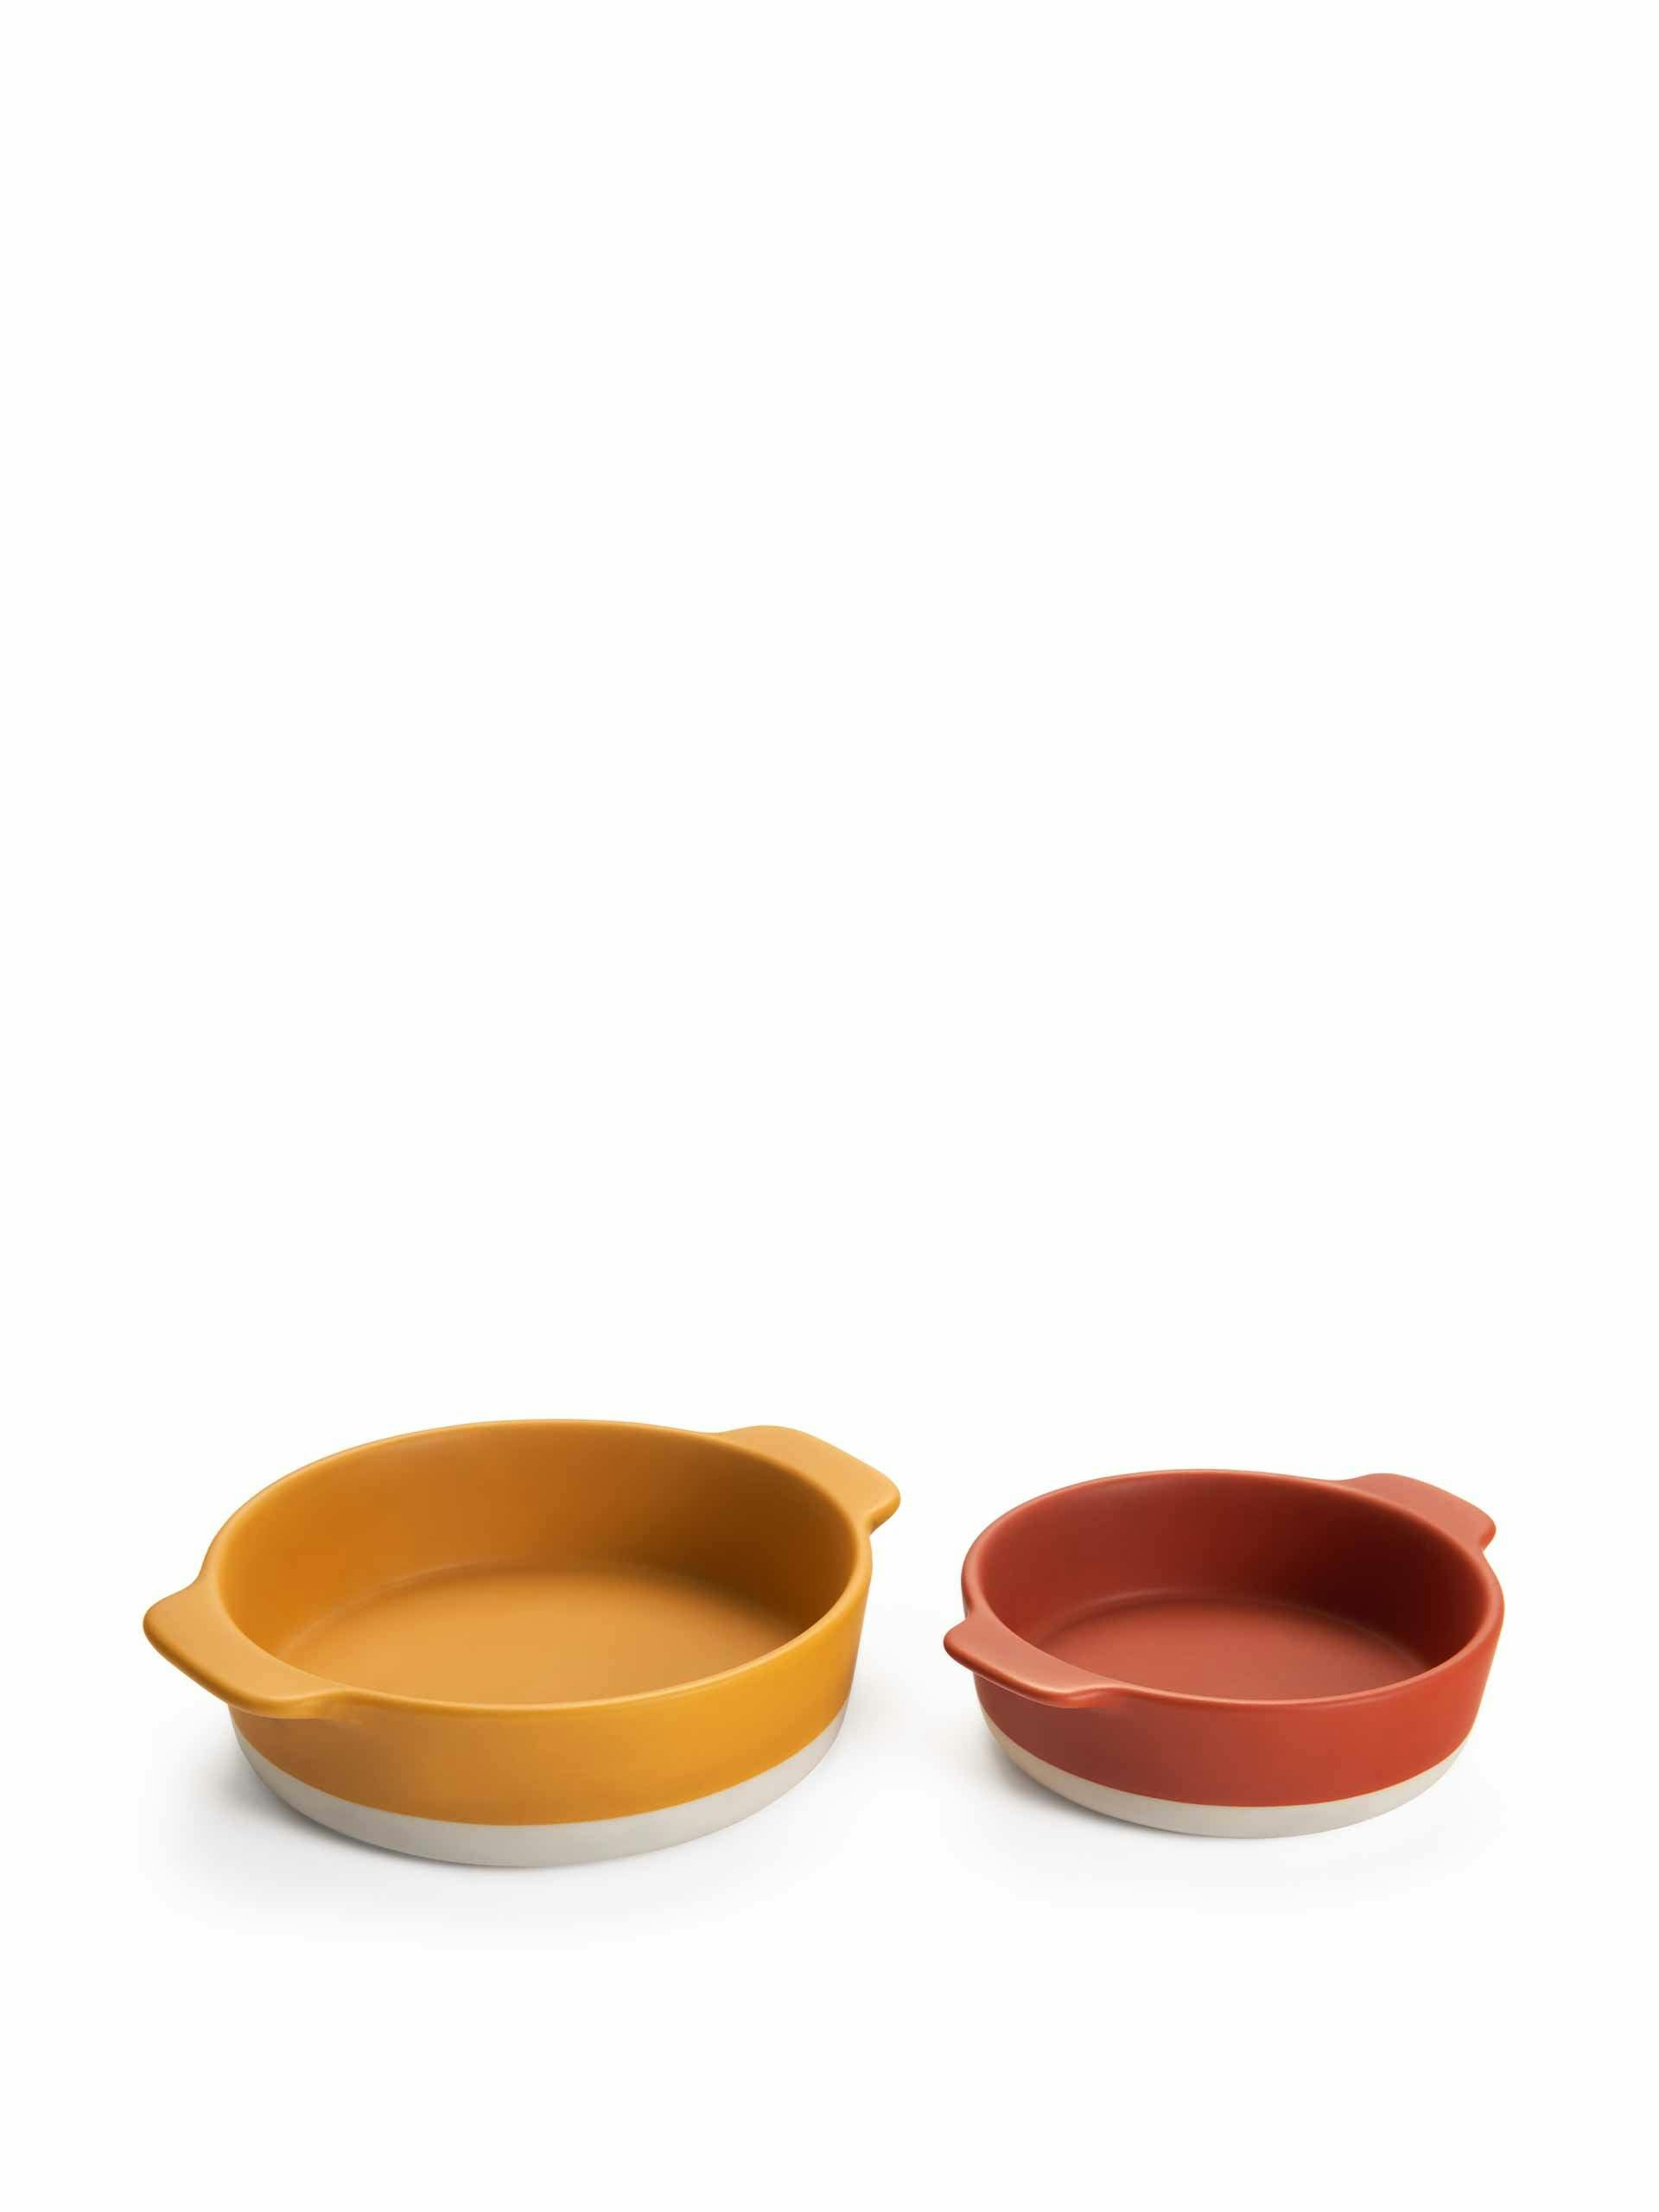 Yellow and red stoneware dishes (set of 2)